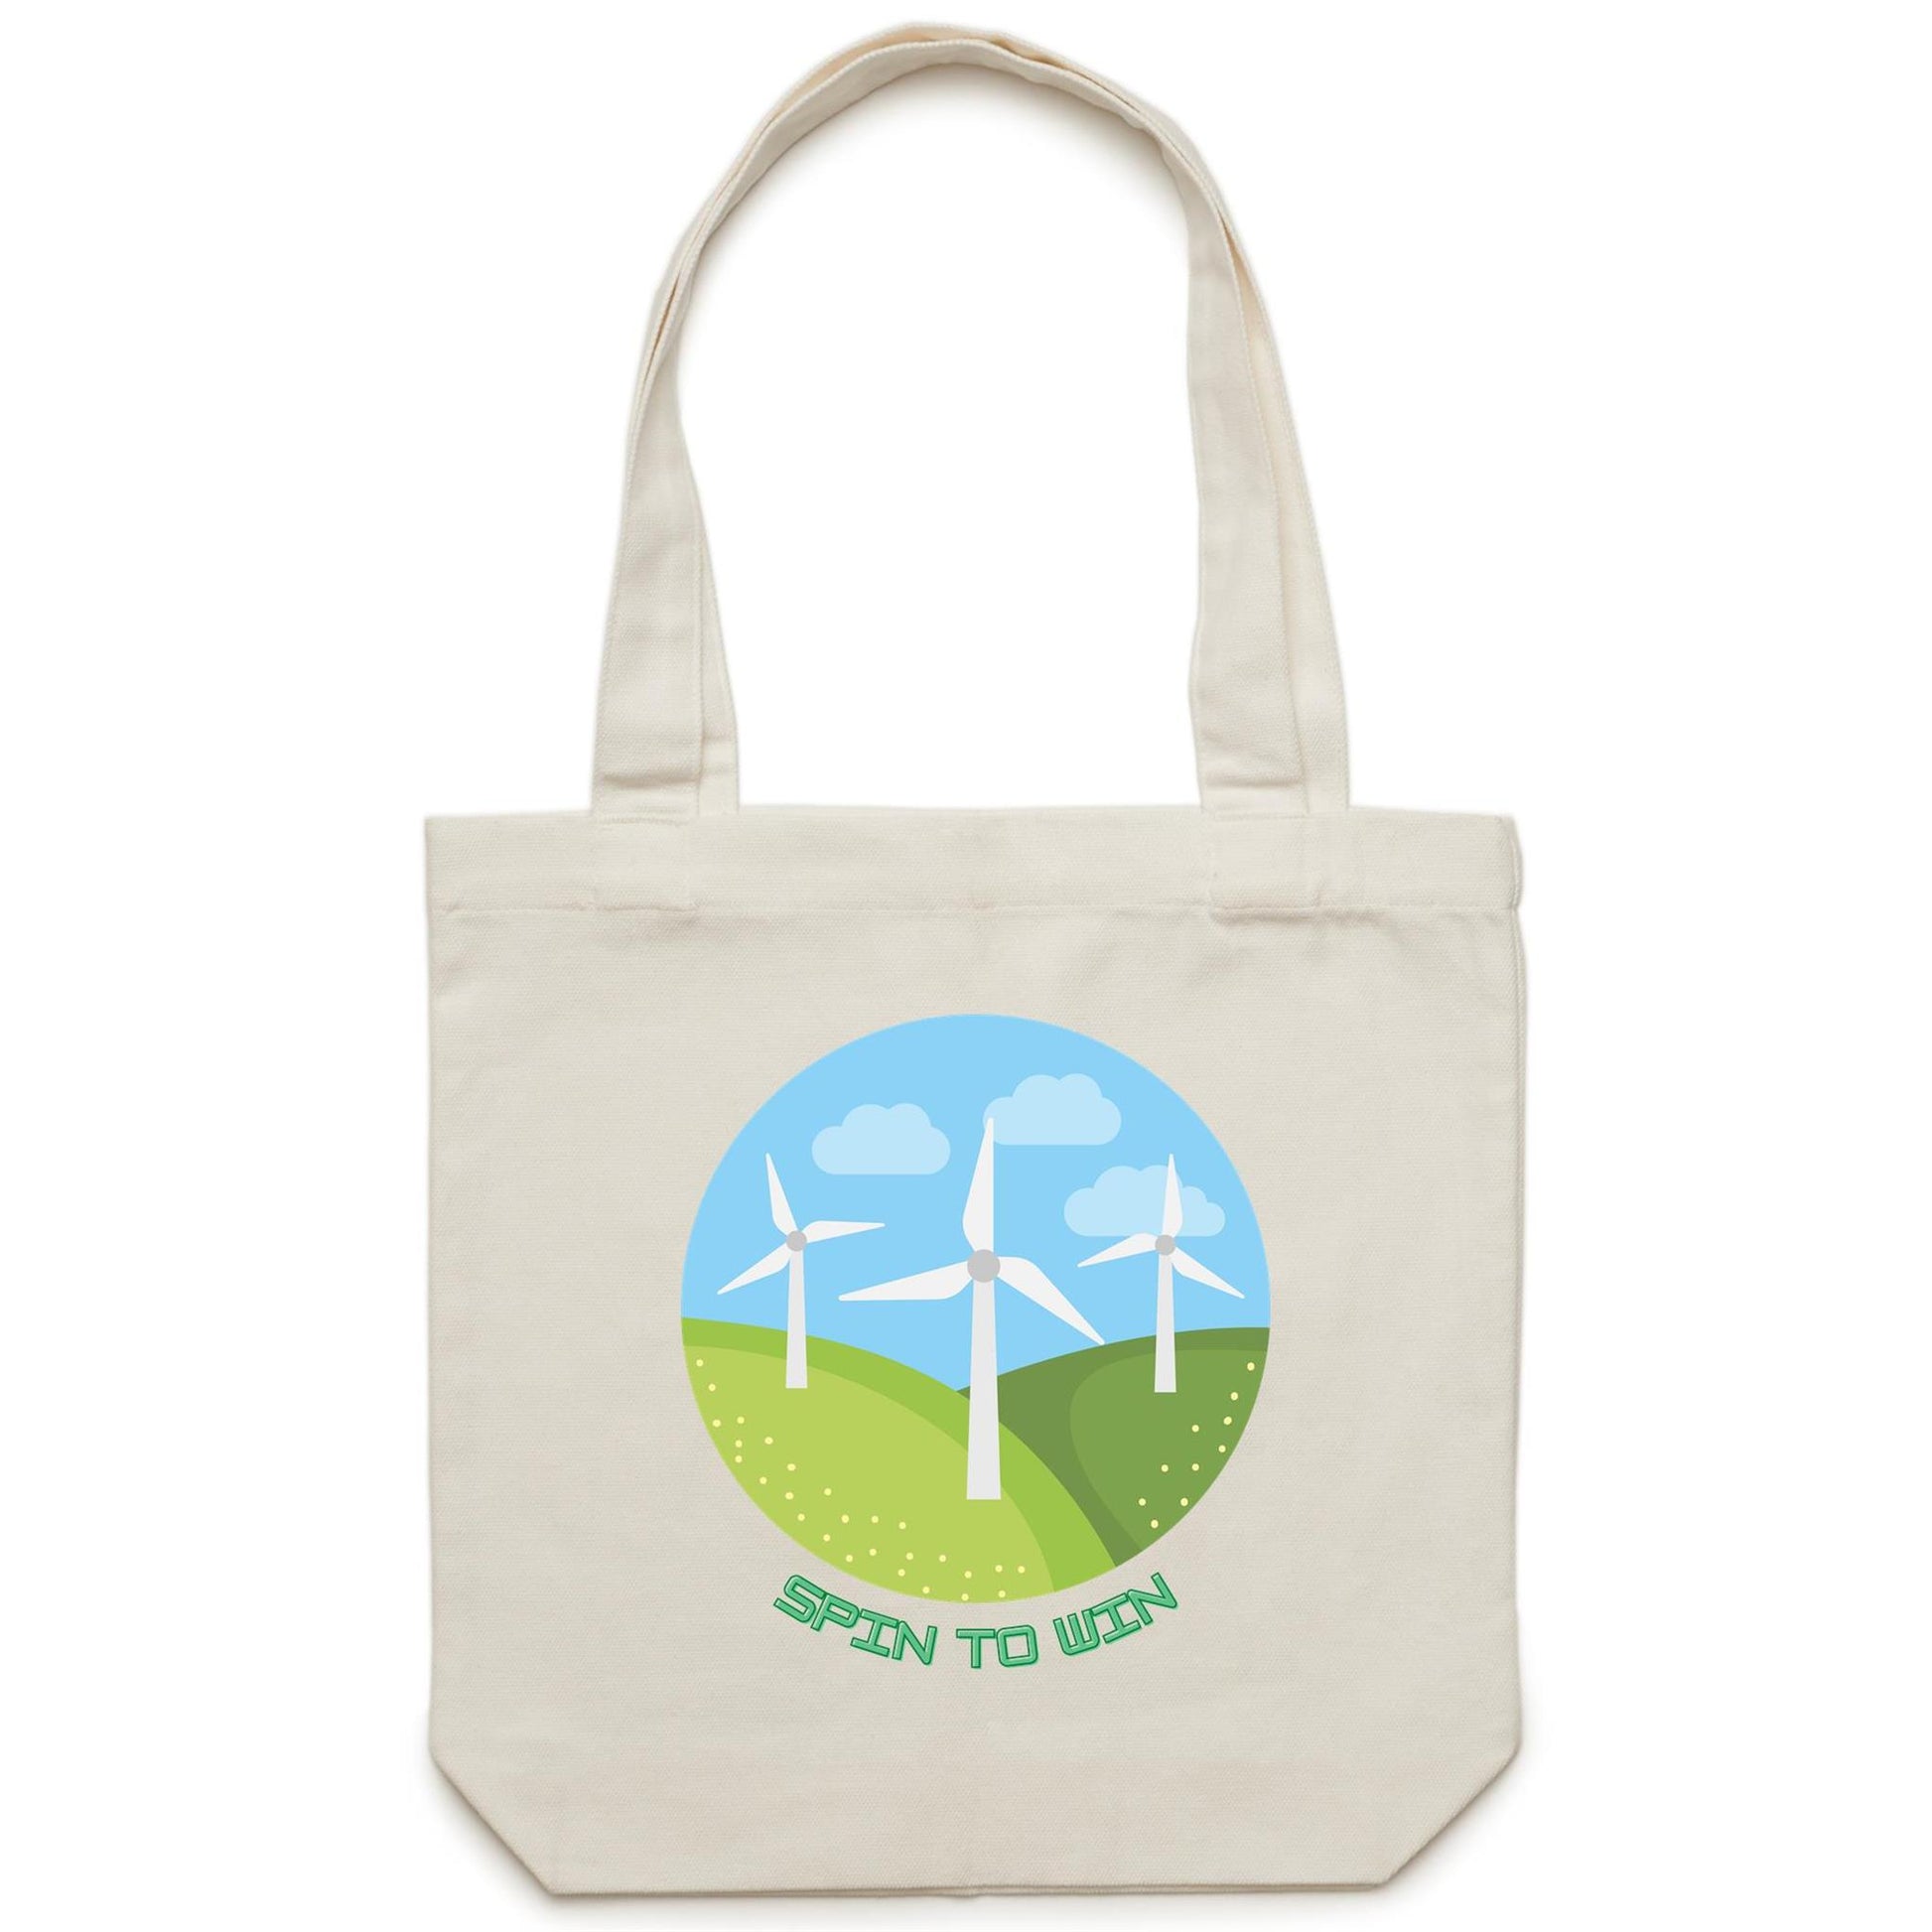 Spin To Win - Canvas Tote Bag Cream One-Size Tote Bag Environment